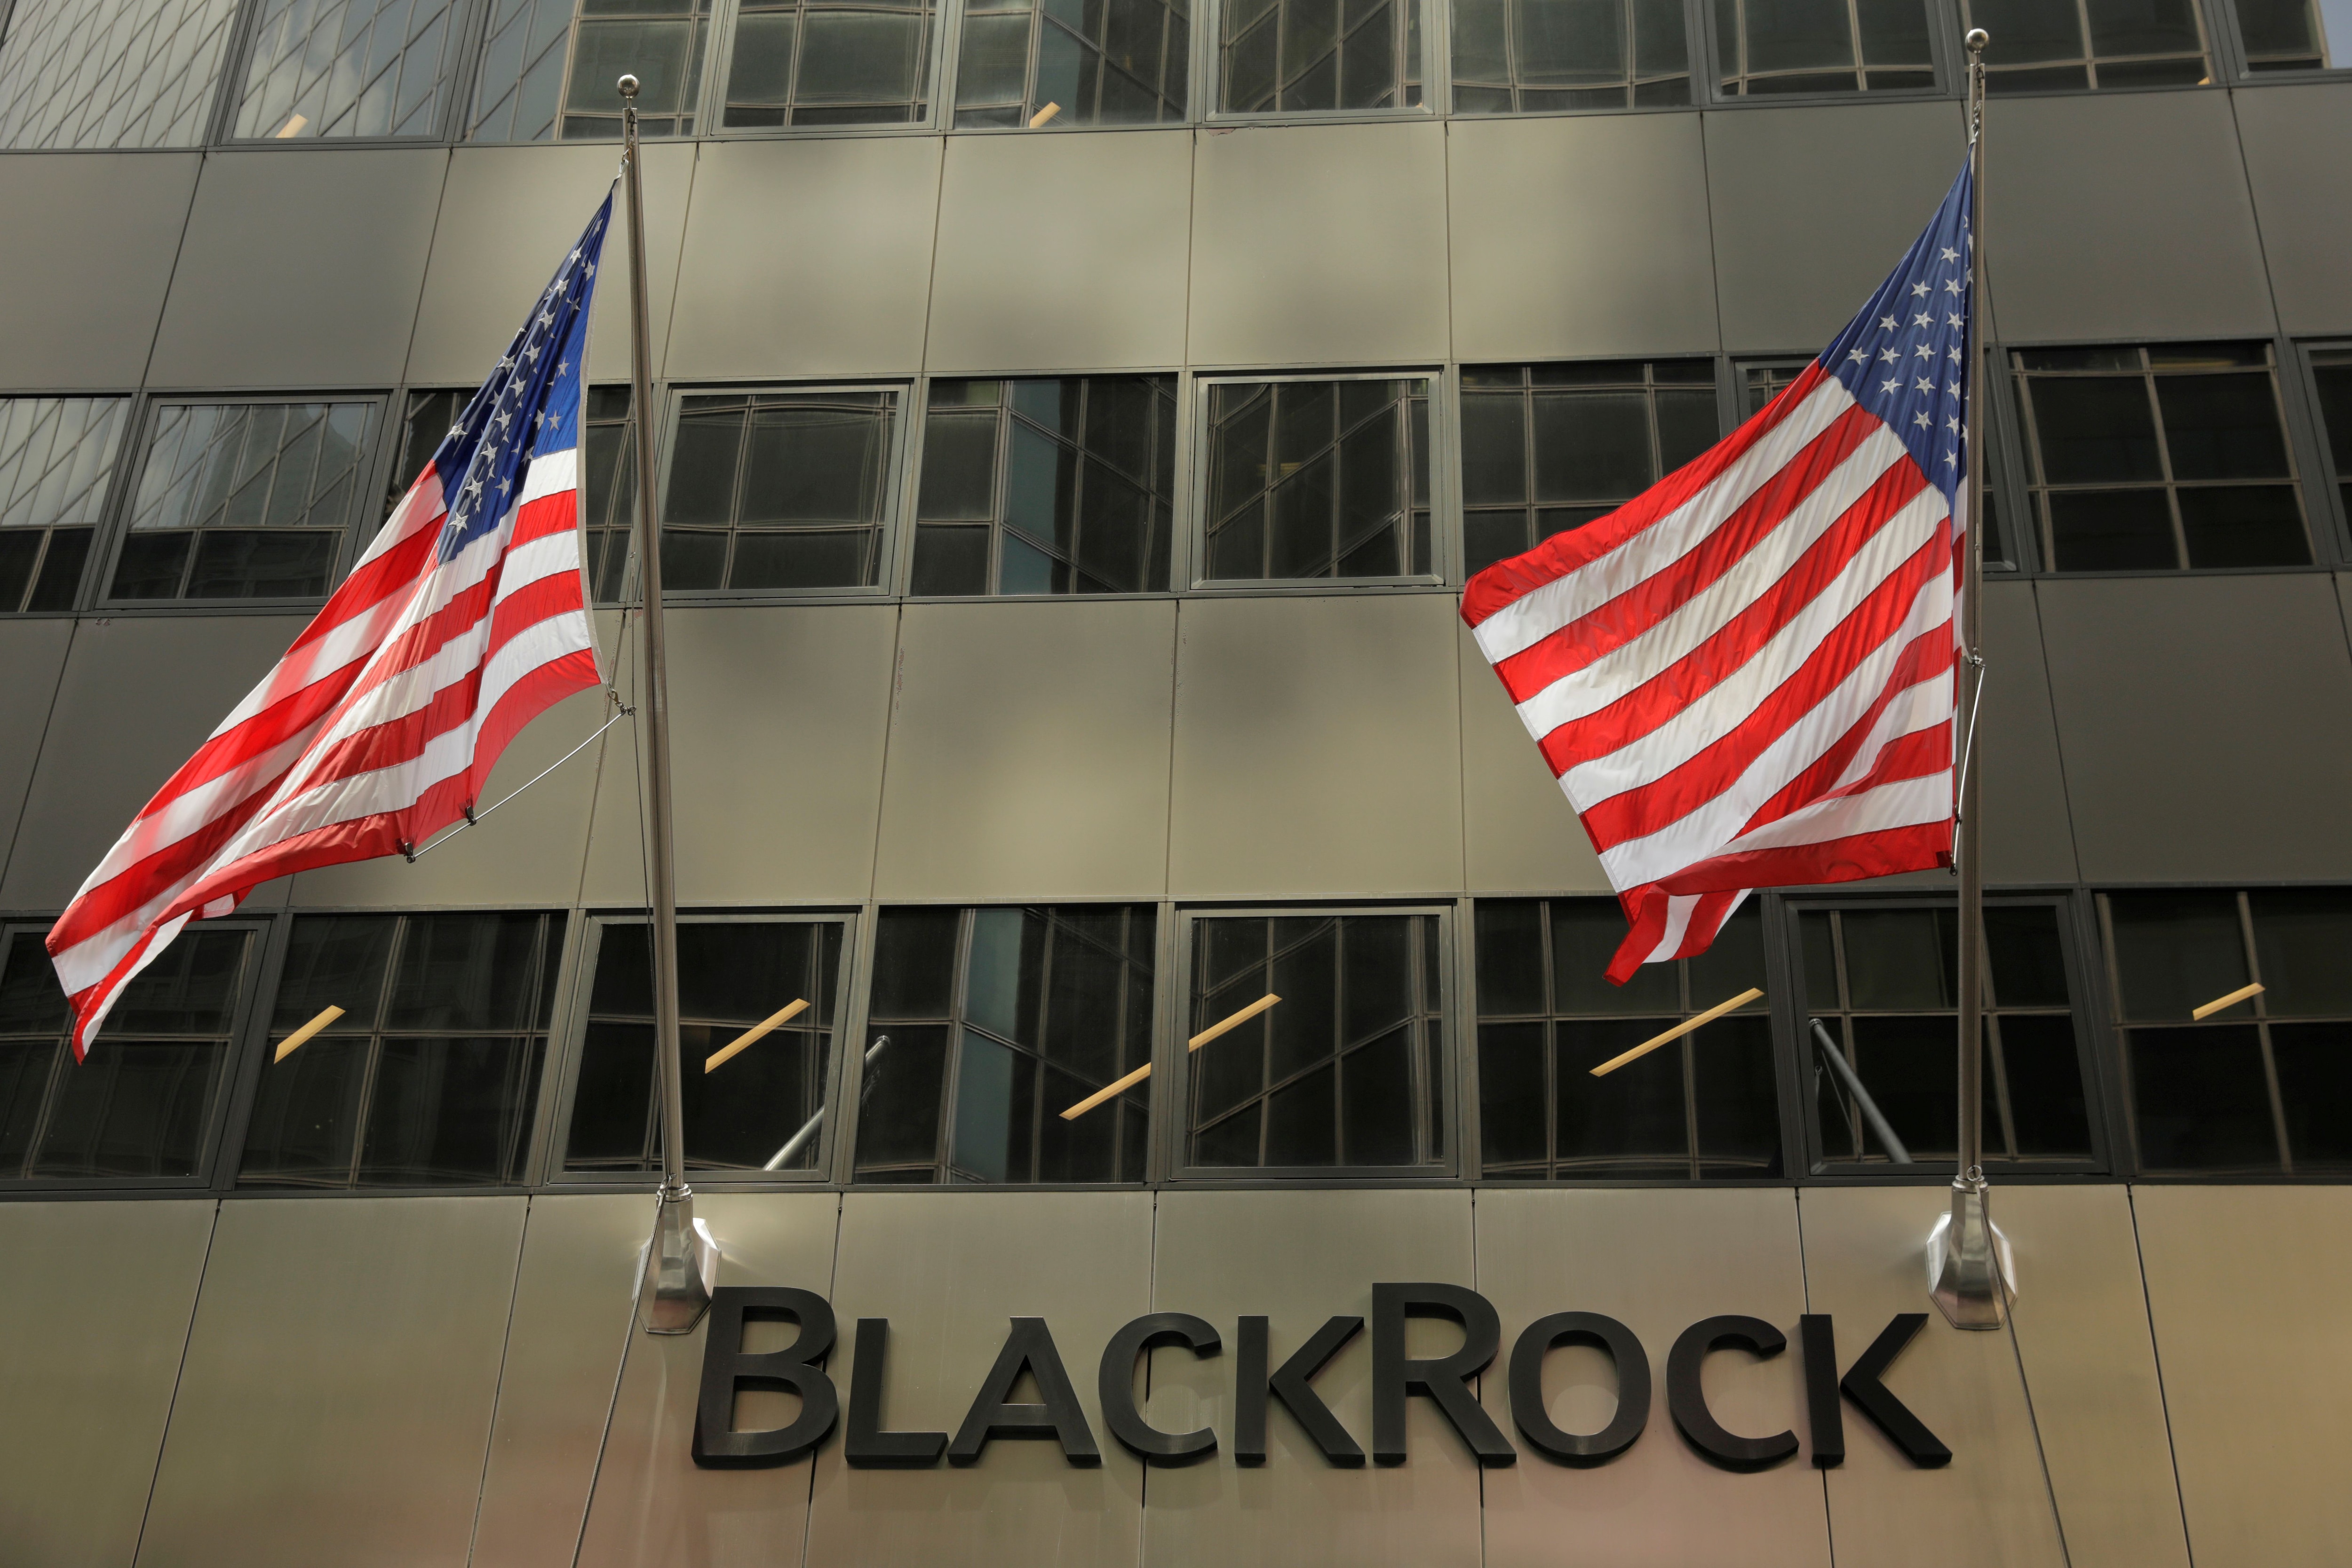 FILE PHOTO: A sign for BlackRock Inc hangs above their building in New York U.S., July 16, 2018/File Photo